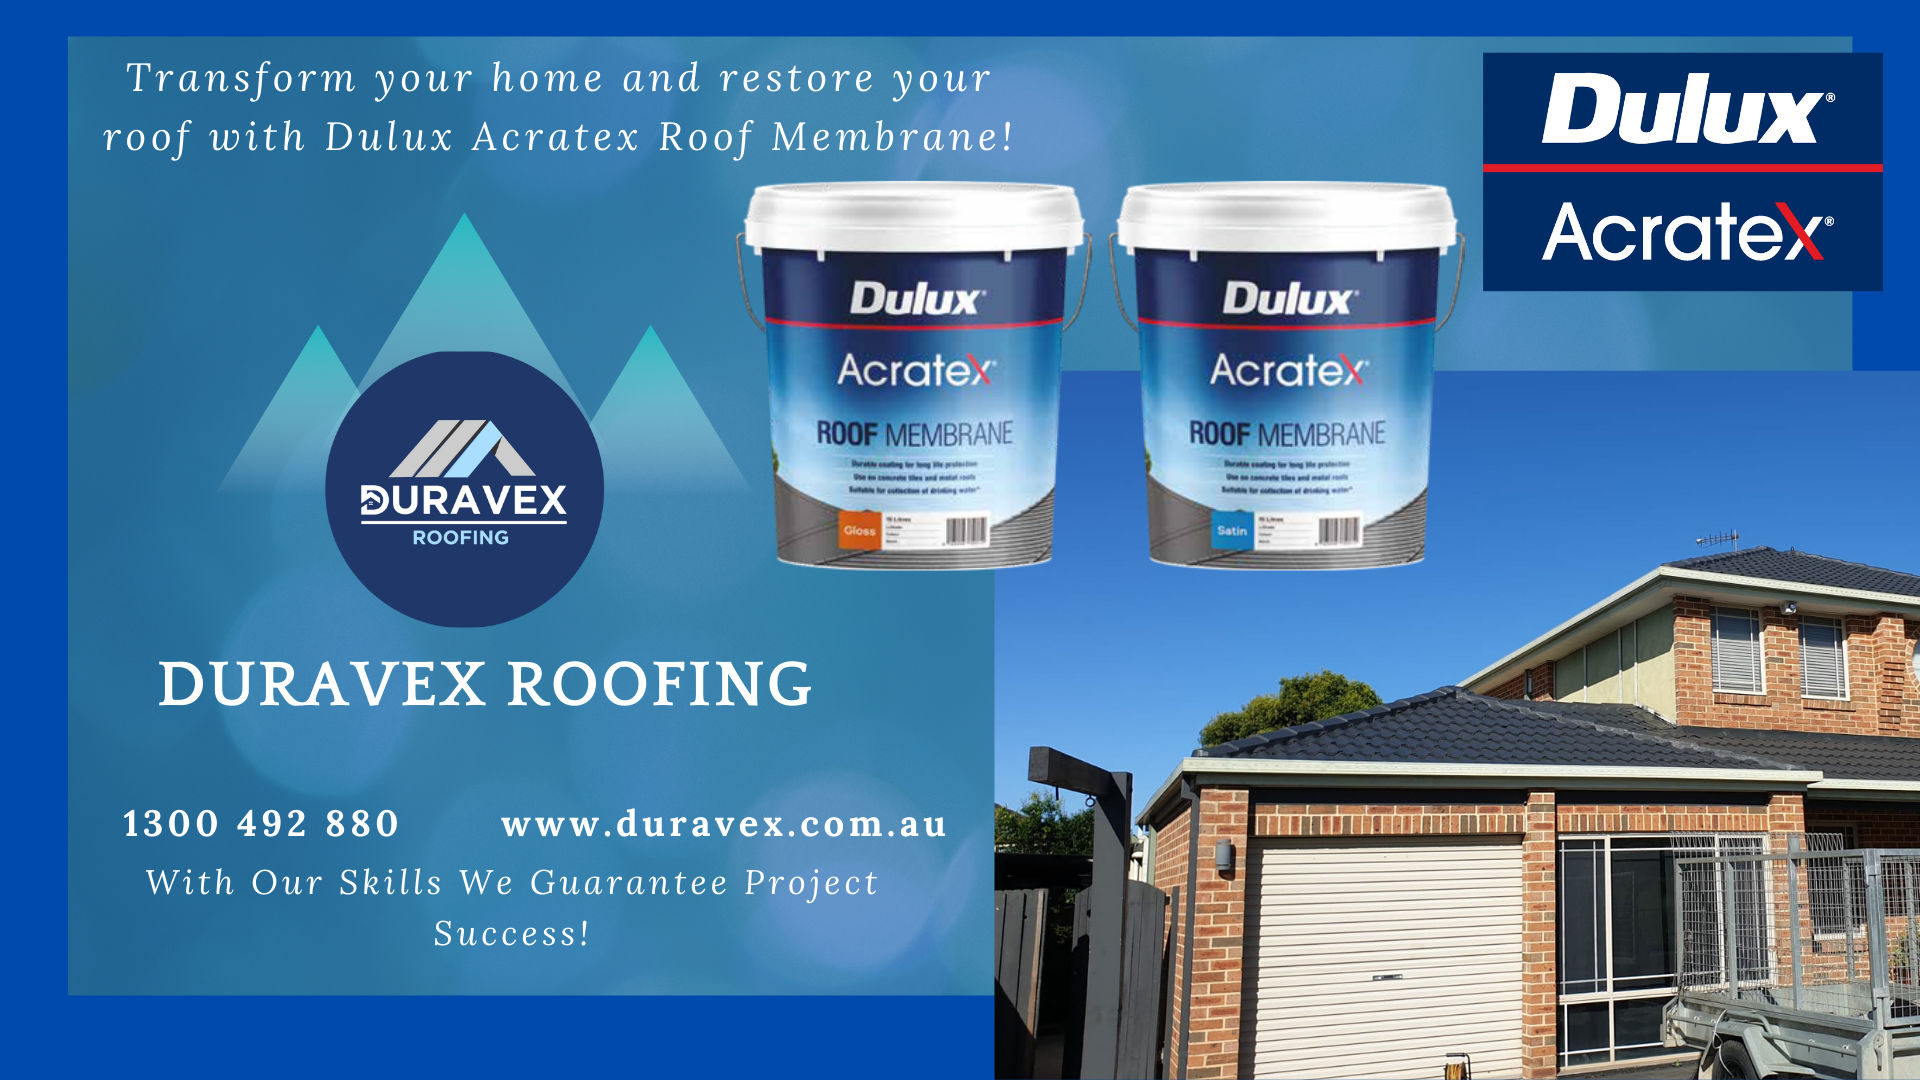 dulux acratex roof restoration services in sydney